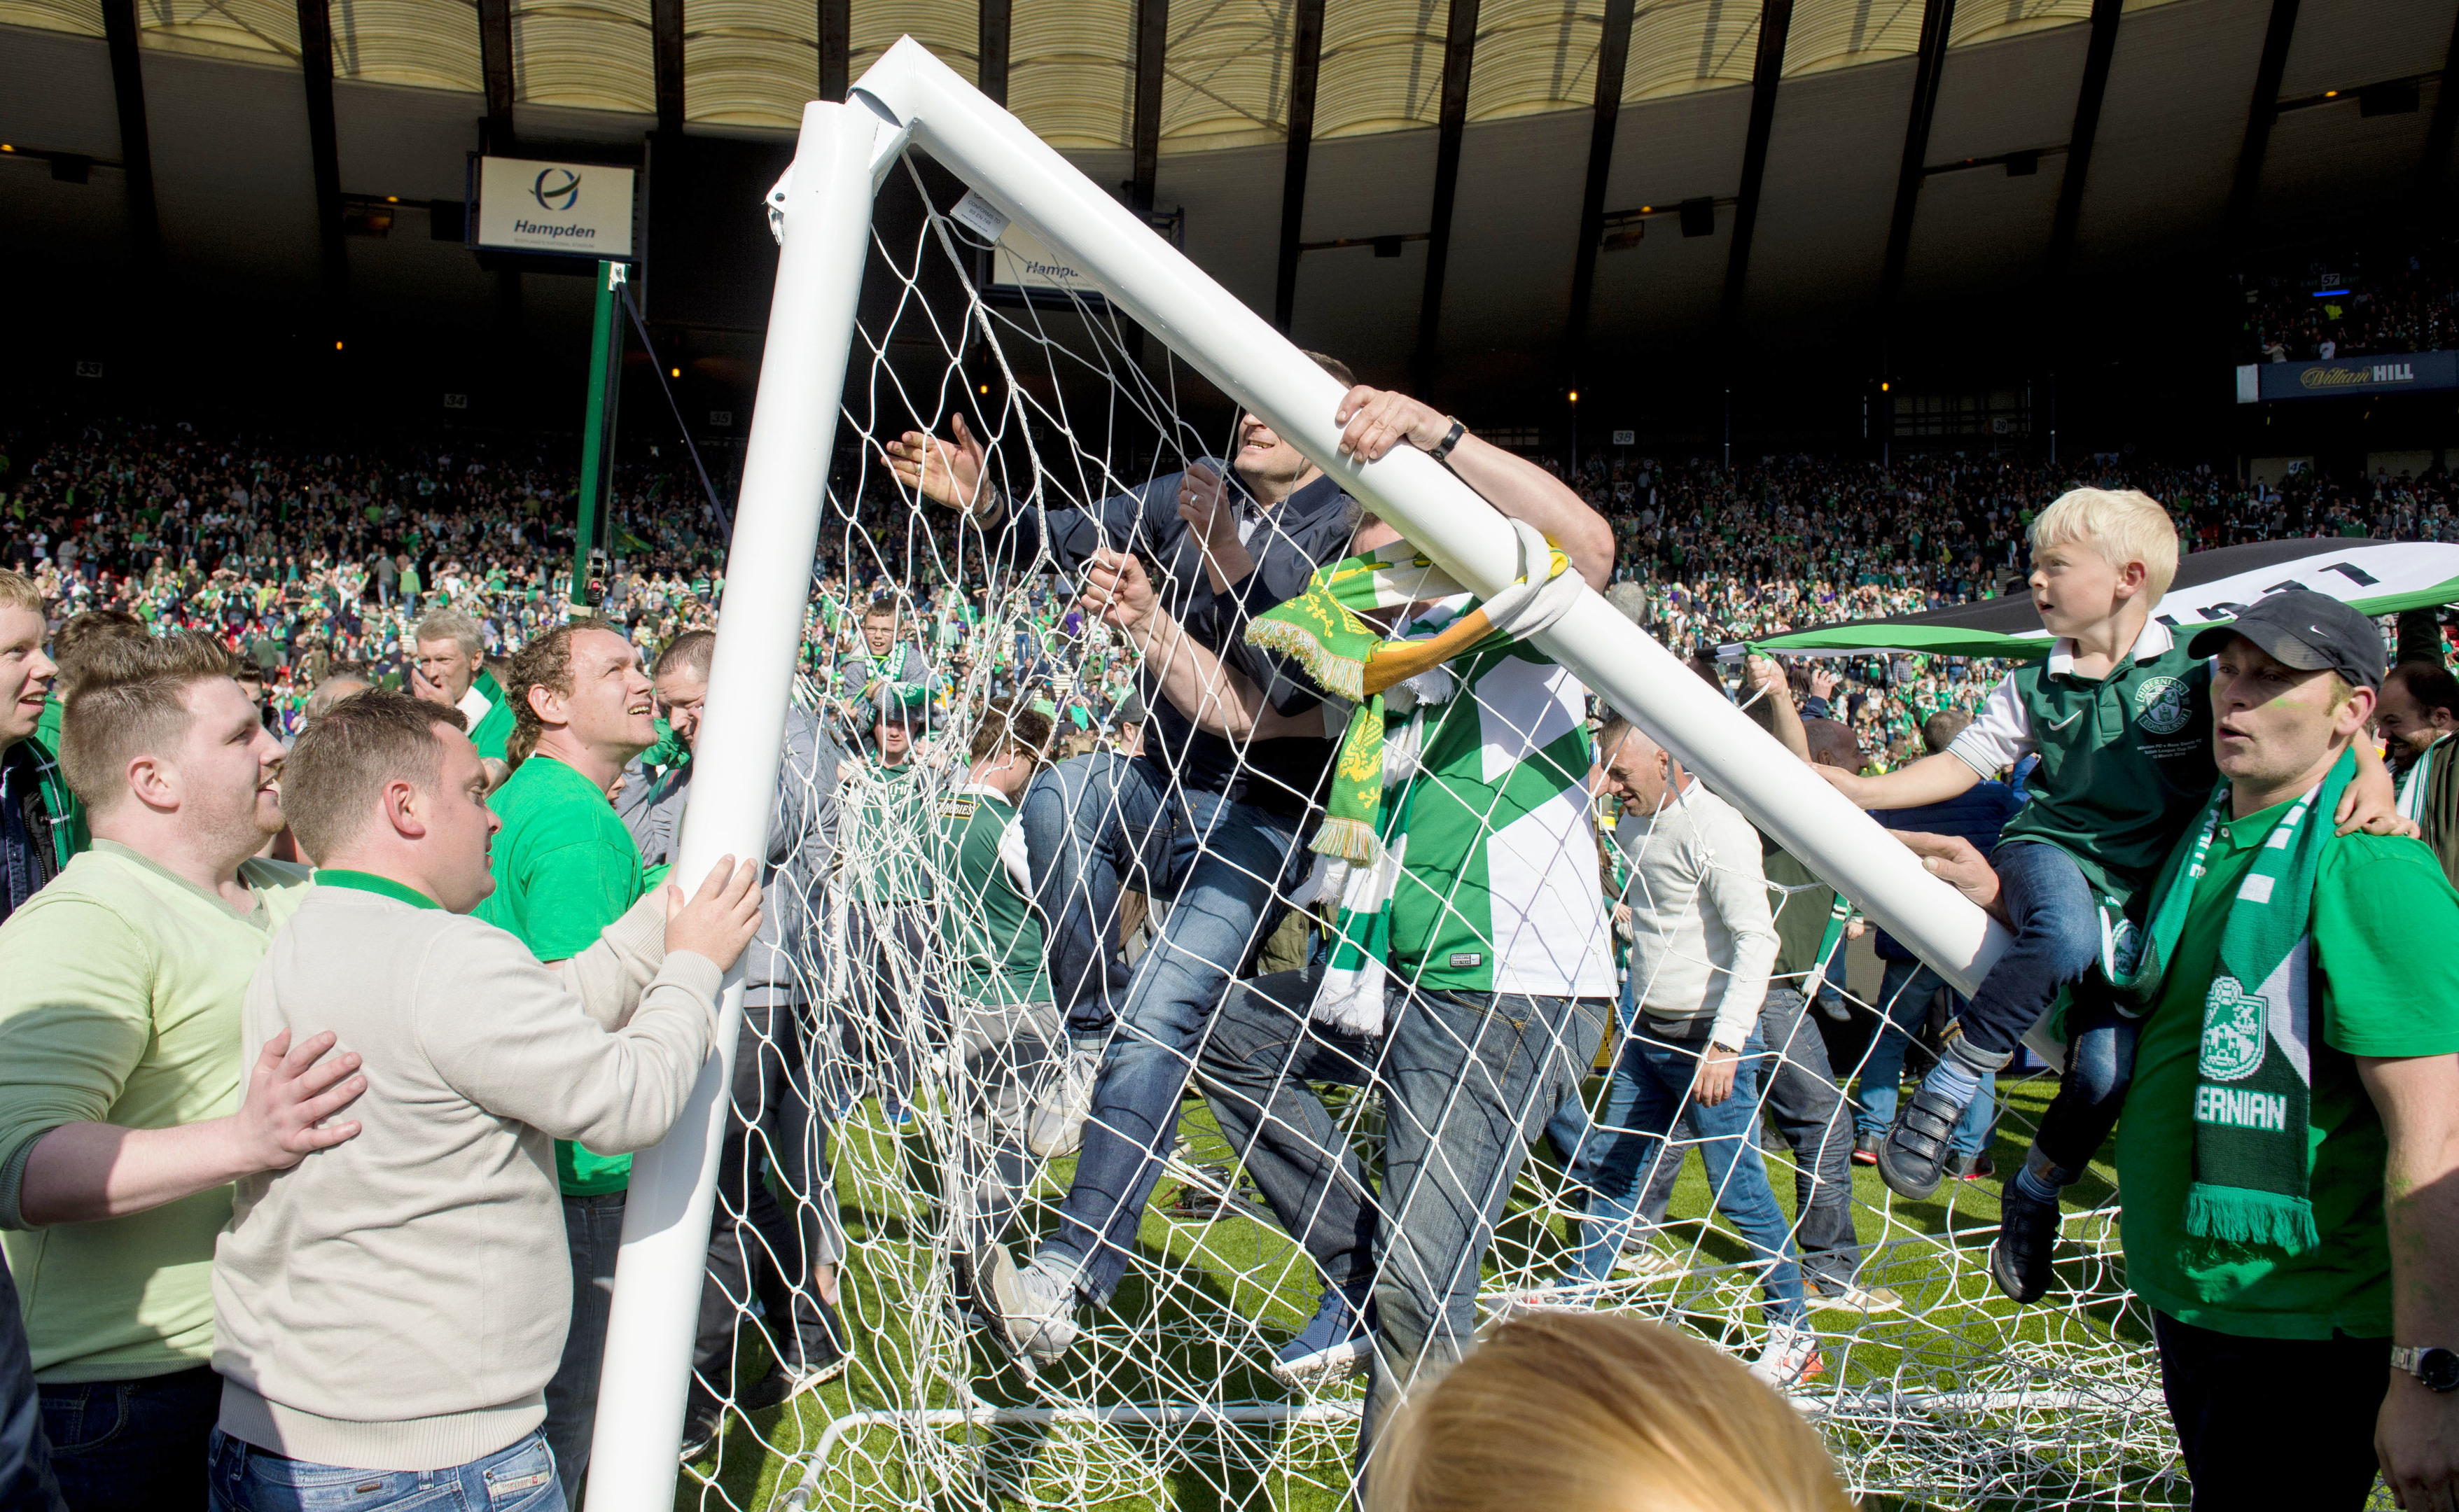 Hibs fans rush the pitch as they celebrate their side's historic win